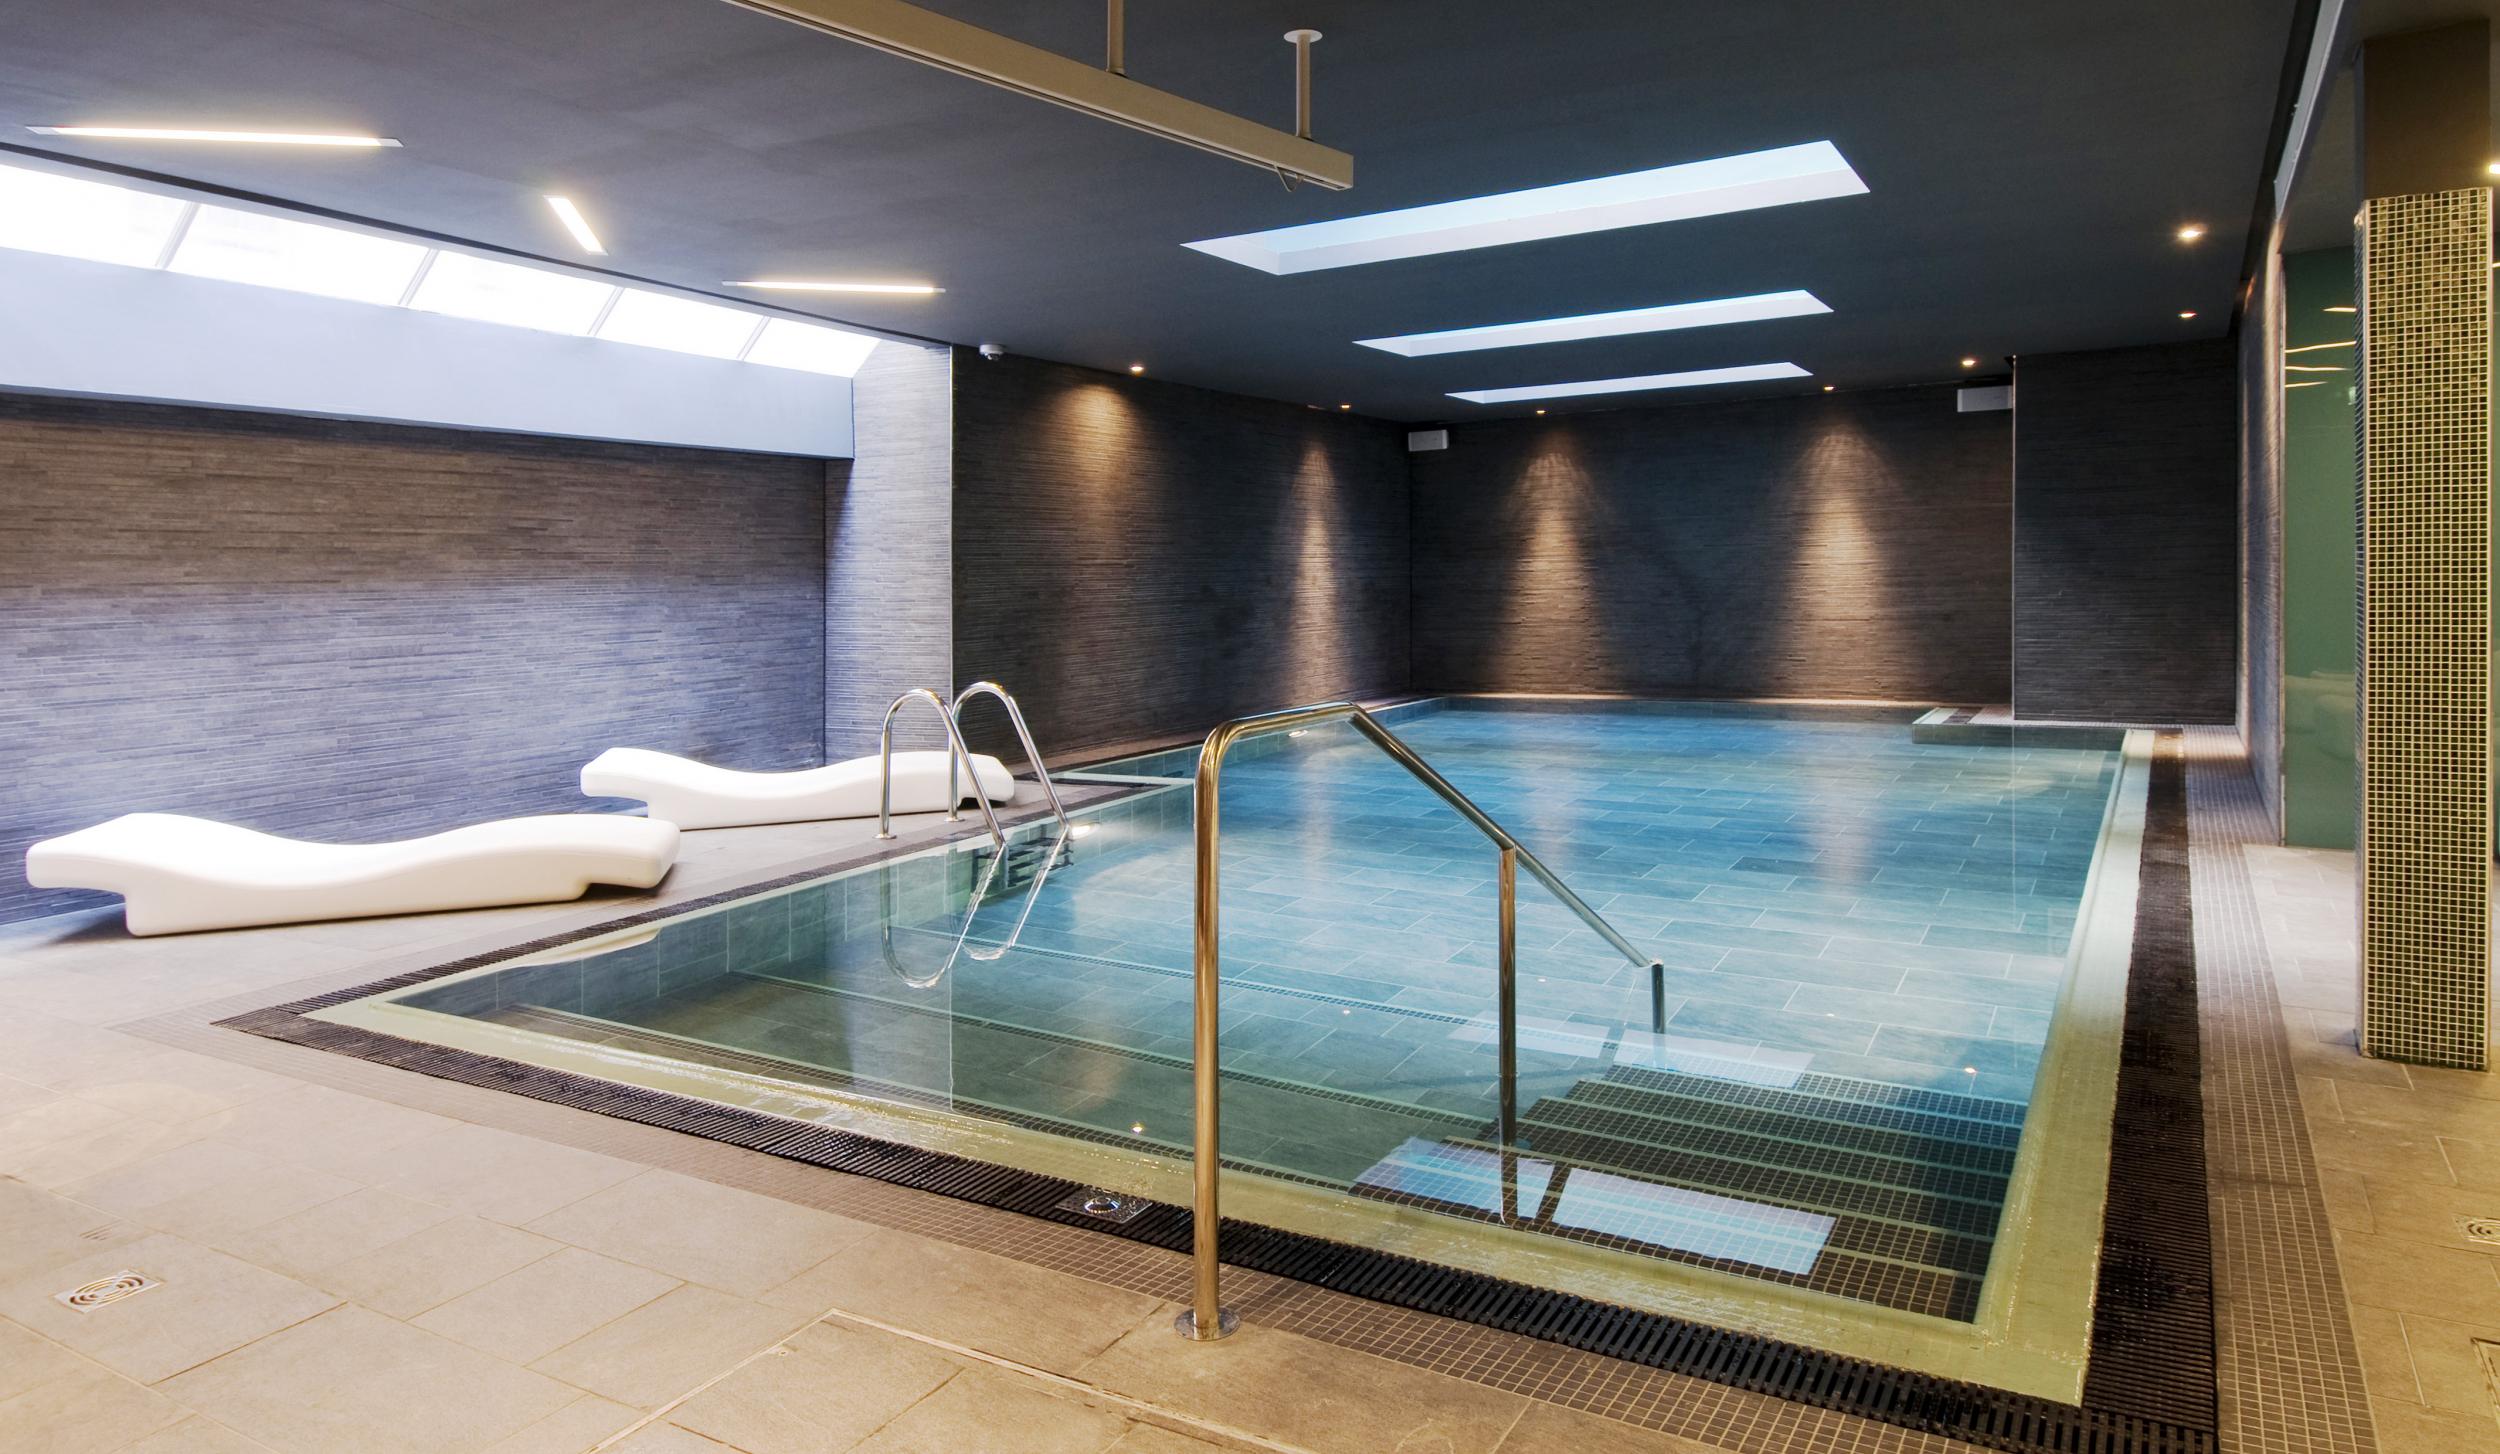 The Apex Waterloo Place has a pool, spa and gym, and is conveniently located for the Royal Mile